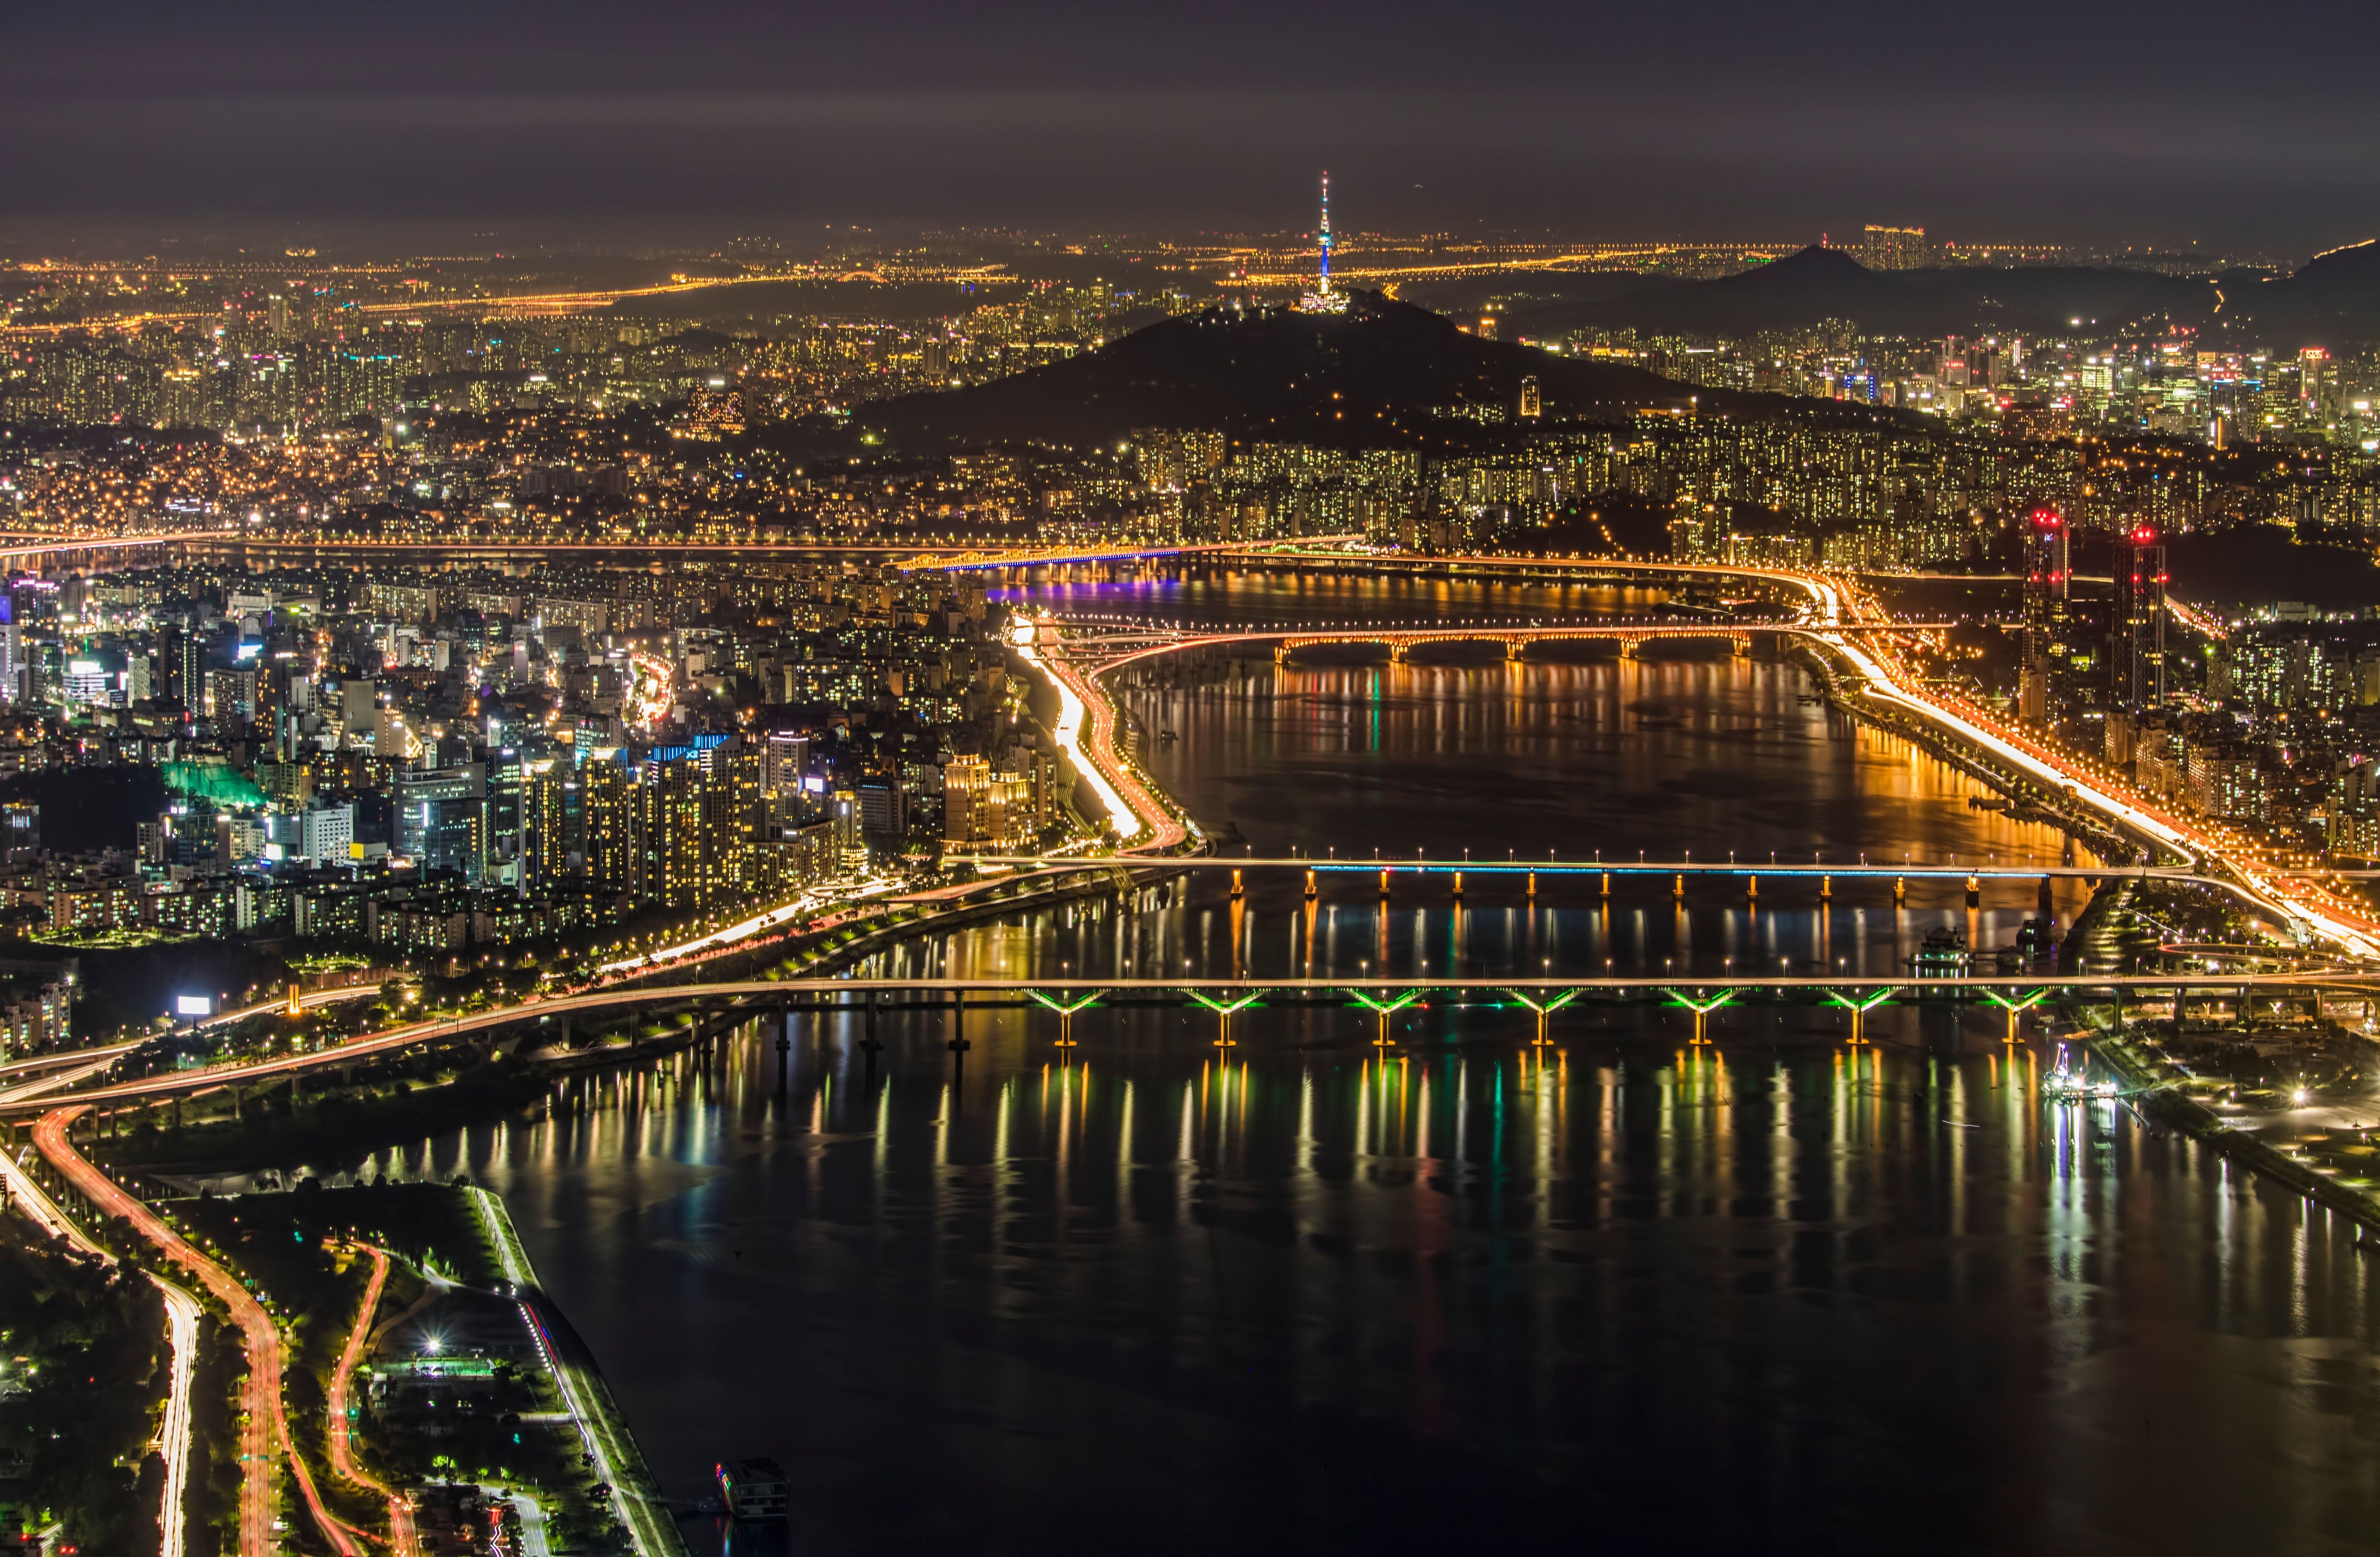 places to visit in seoul at night